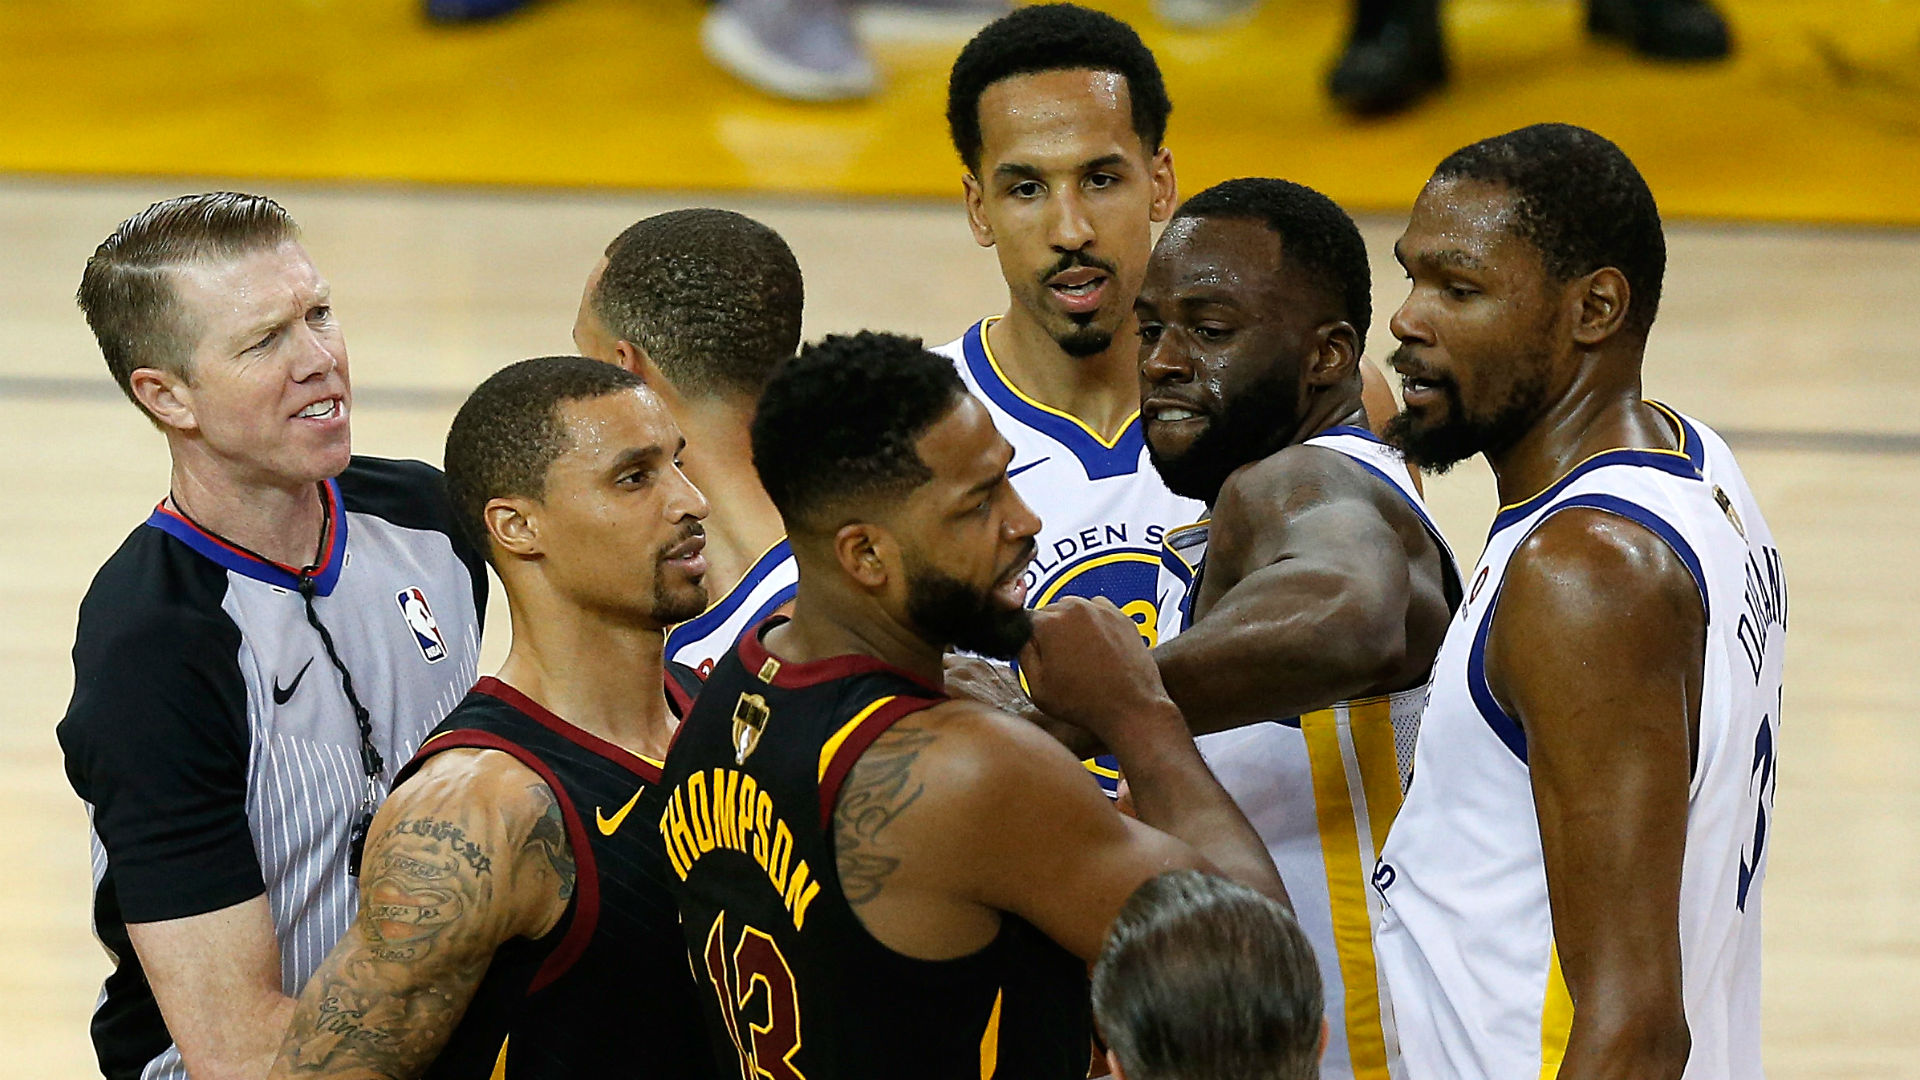 Nba Finals Tempers Flare As Tristan Thompson Shoves Draymond